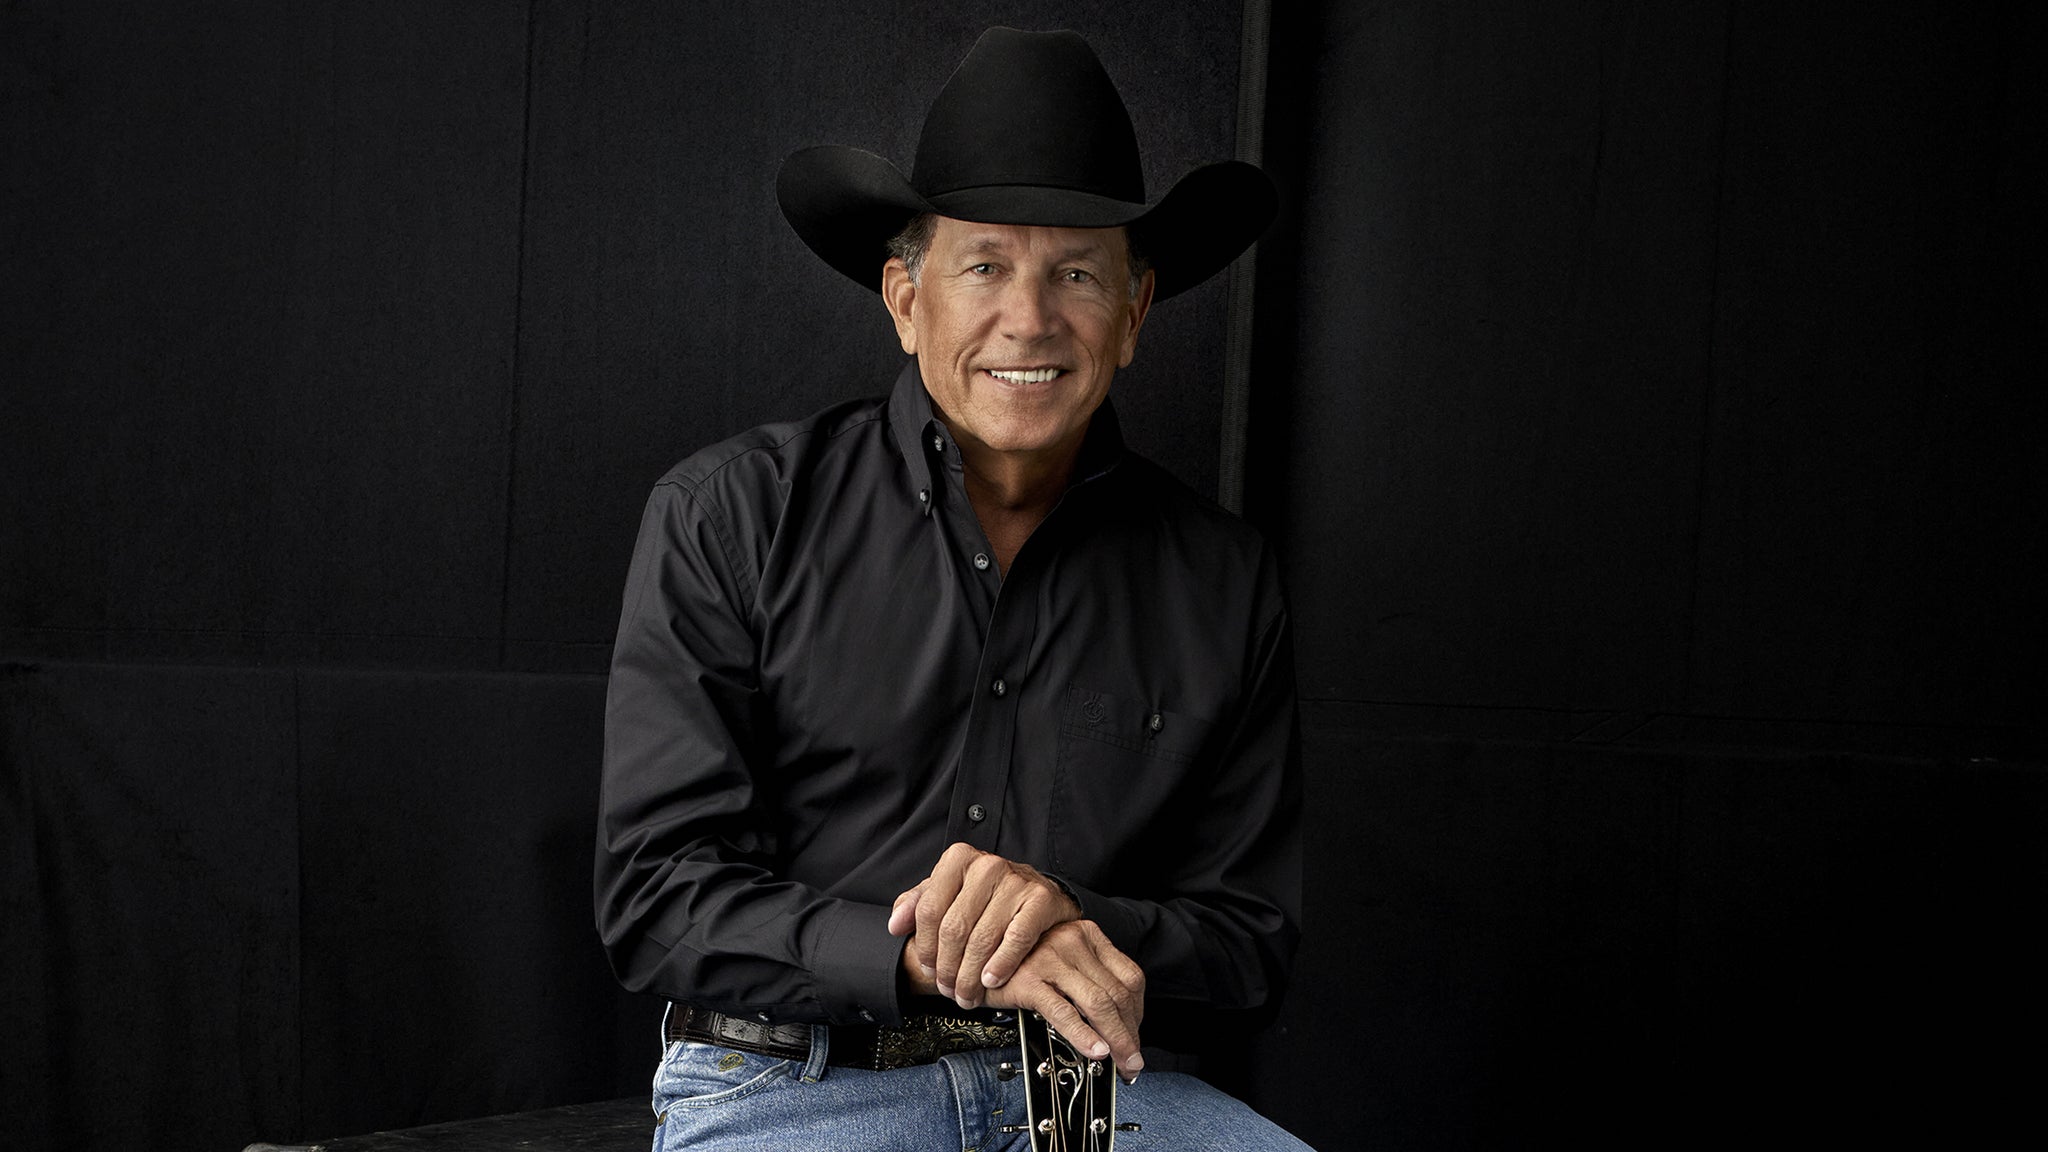 George Strait Concert | Live Stream, Date, Location and Tickets info